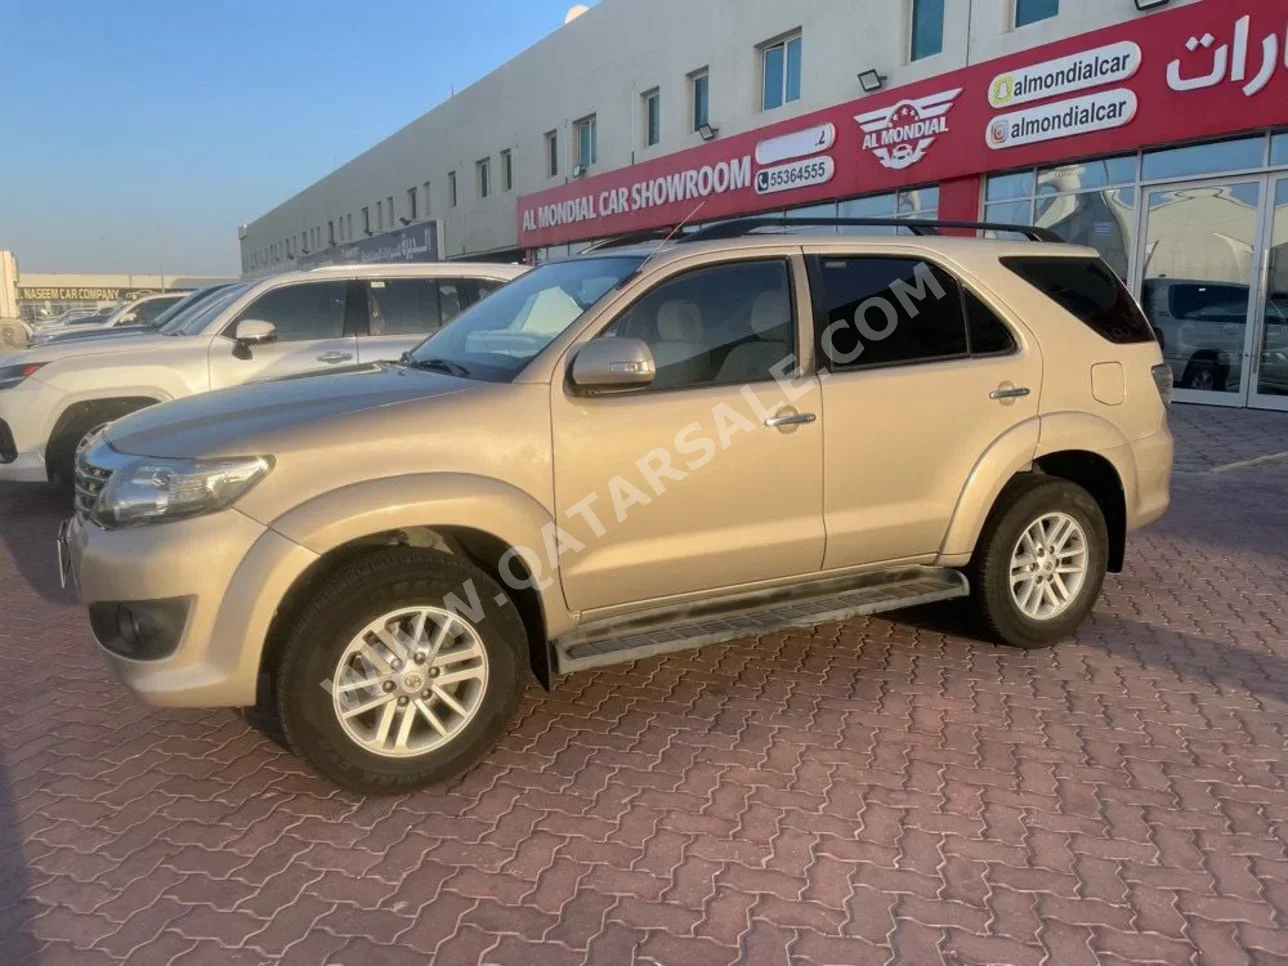 Toyota  Fortuner  2013  Automatic  249,000 Km  6 Cylinder  Four Wheel Drive (4WD)  SUV  Gold